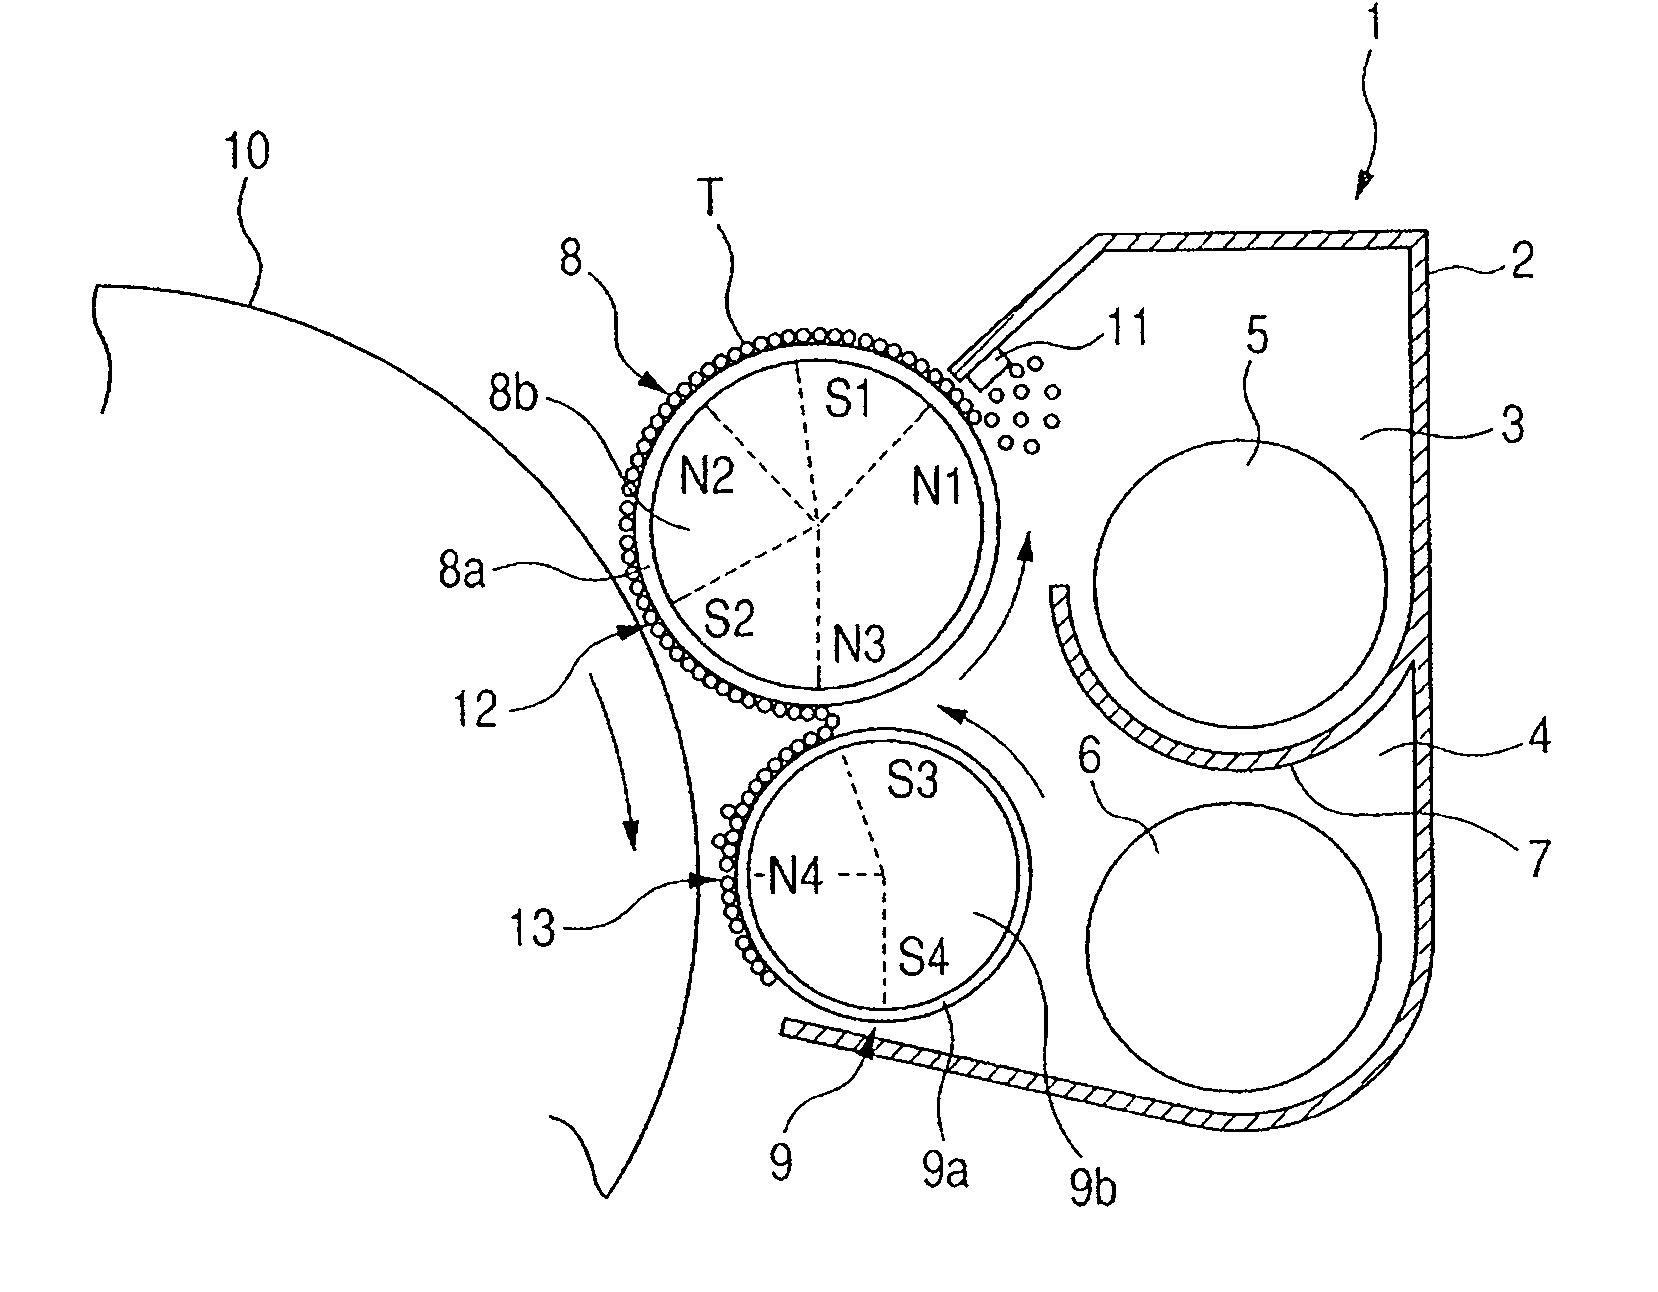 Developing apparatus featuring multiple magnetic rollers for developing a latent image multiple times